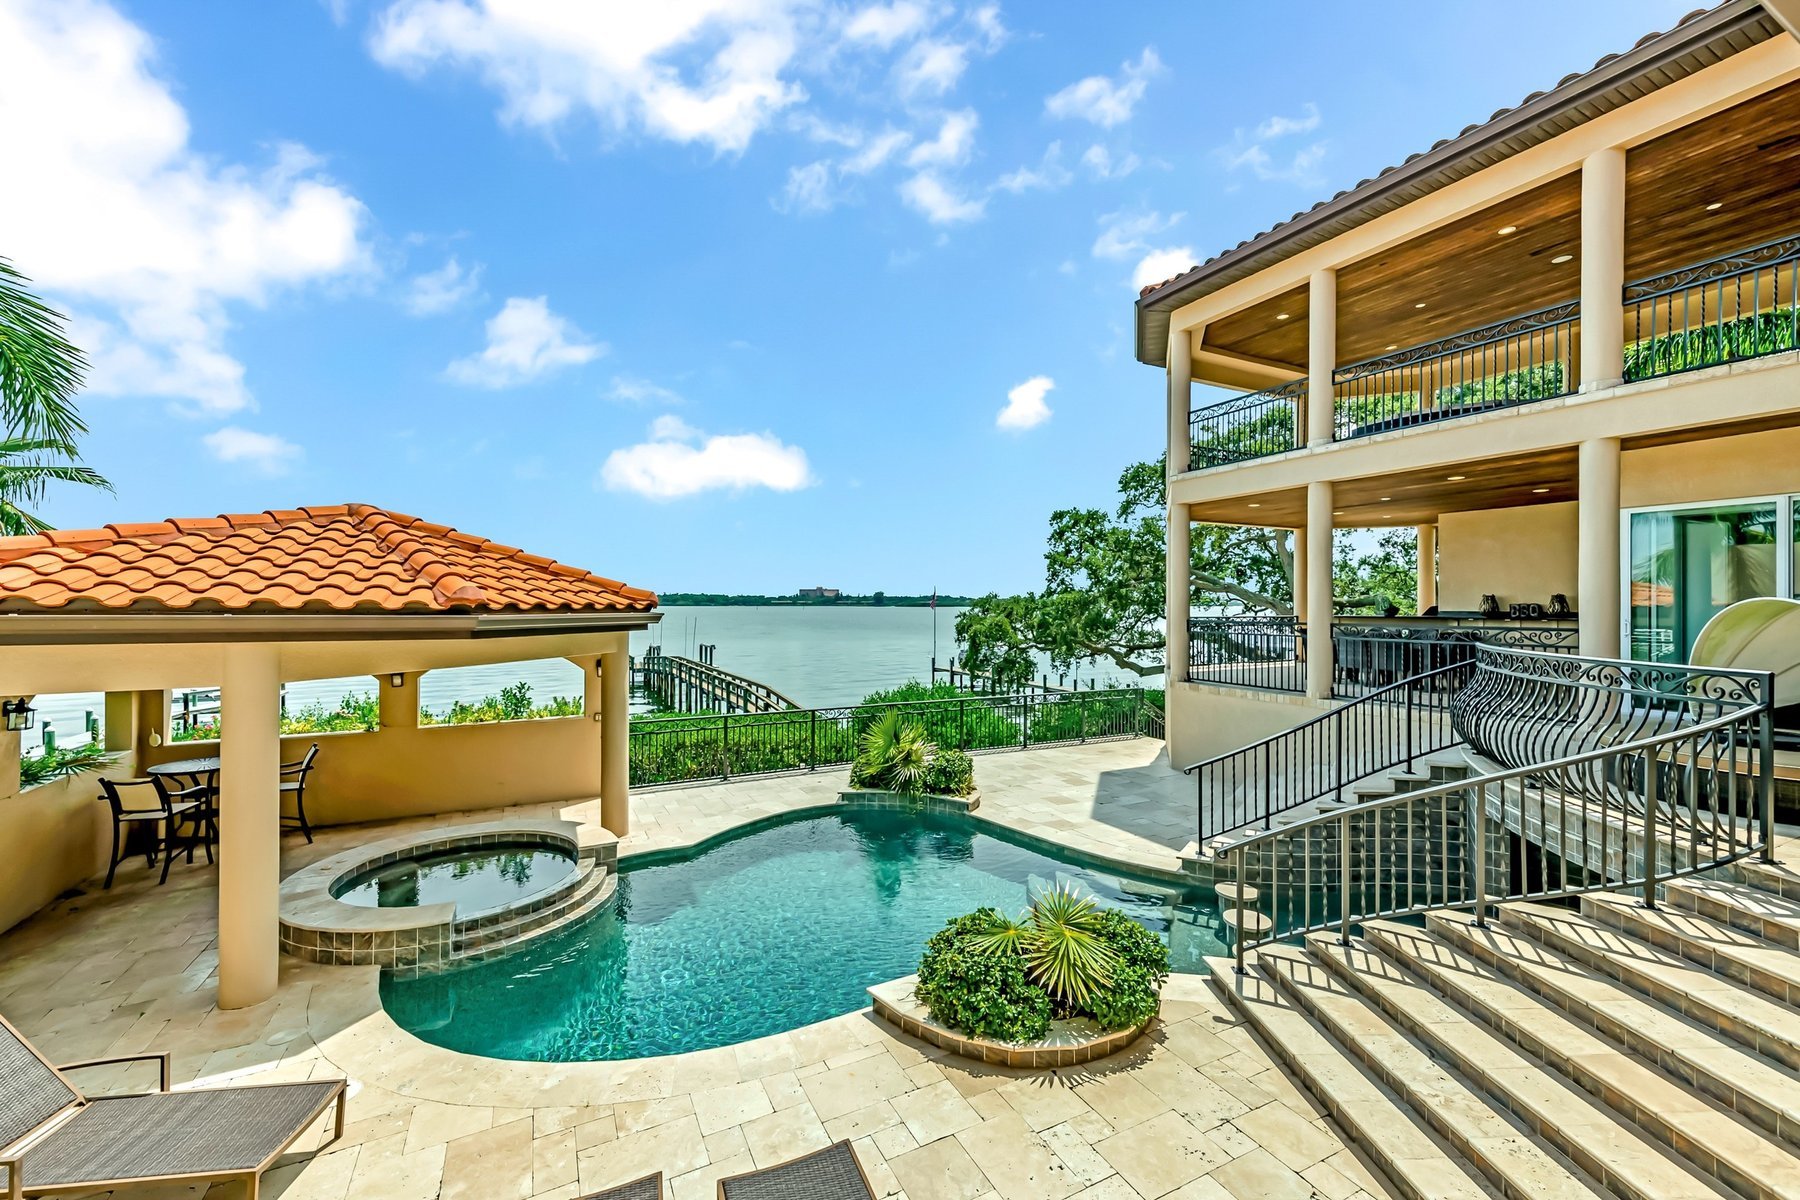 The home offers a view of Little Sarasota Bay from the southern end of Siesta Key. (Courtesy photo)